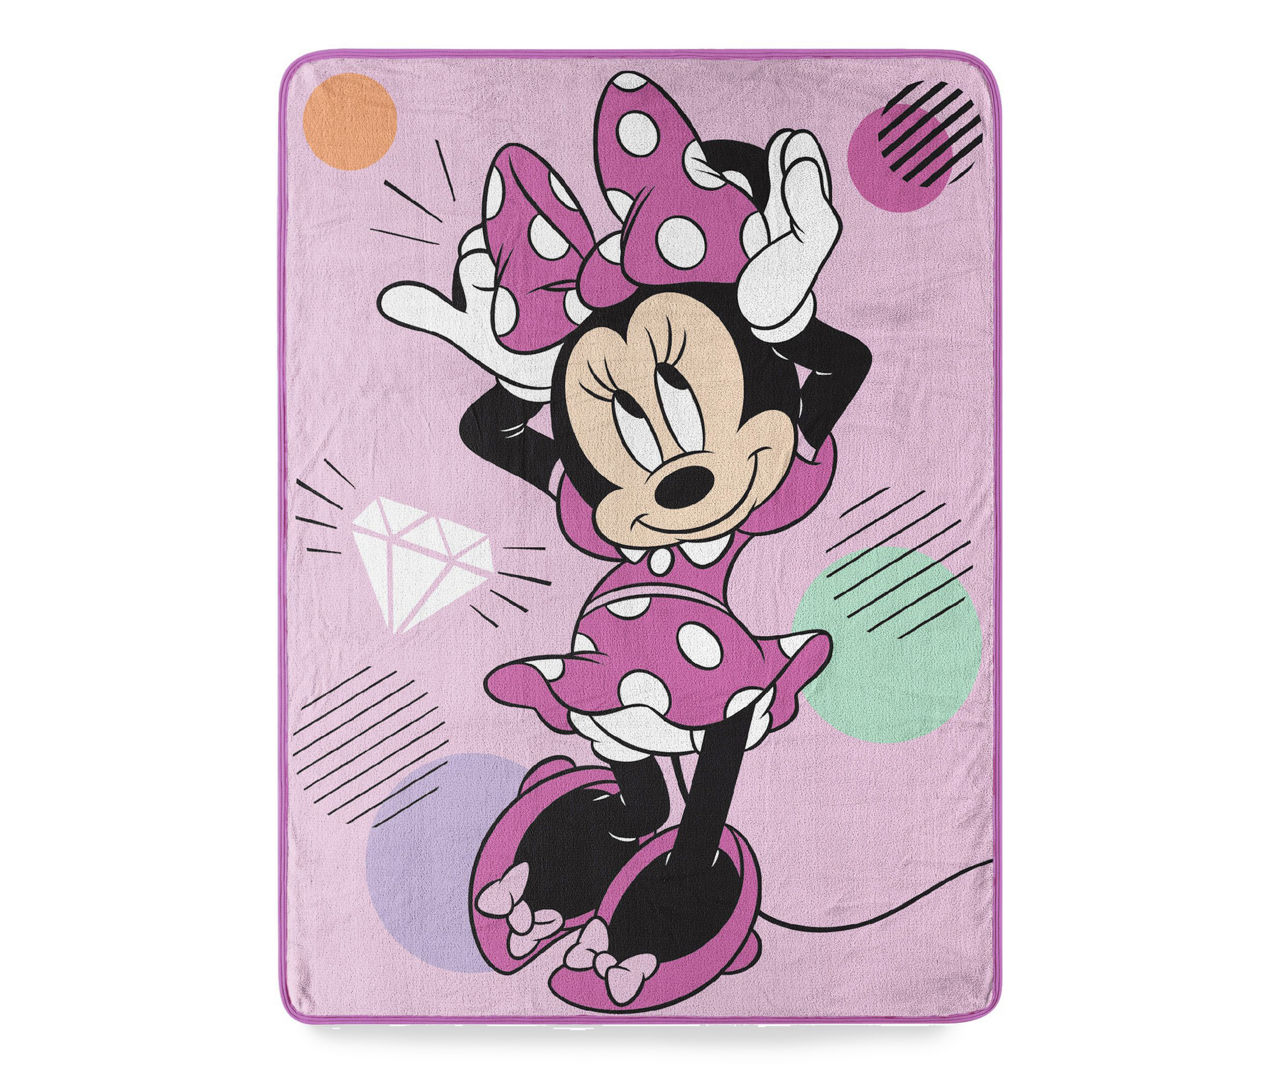 Disneys Minnie Mouse Multi Color 48 x 48 Dot Youth Comfy Throw Blanket with Sleeves 